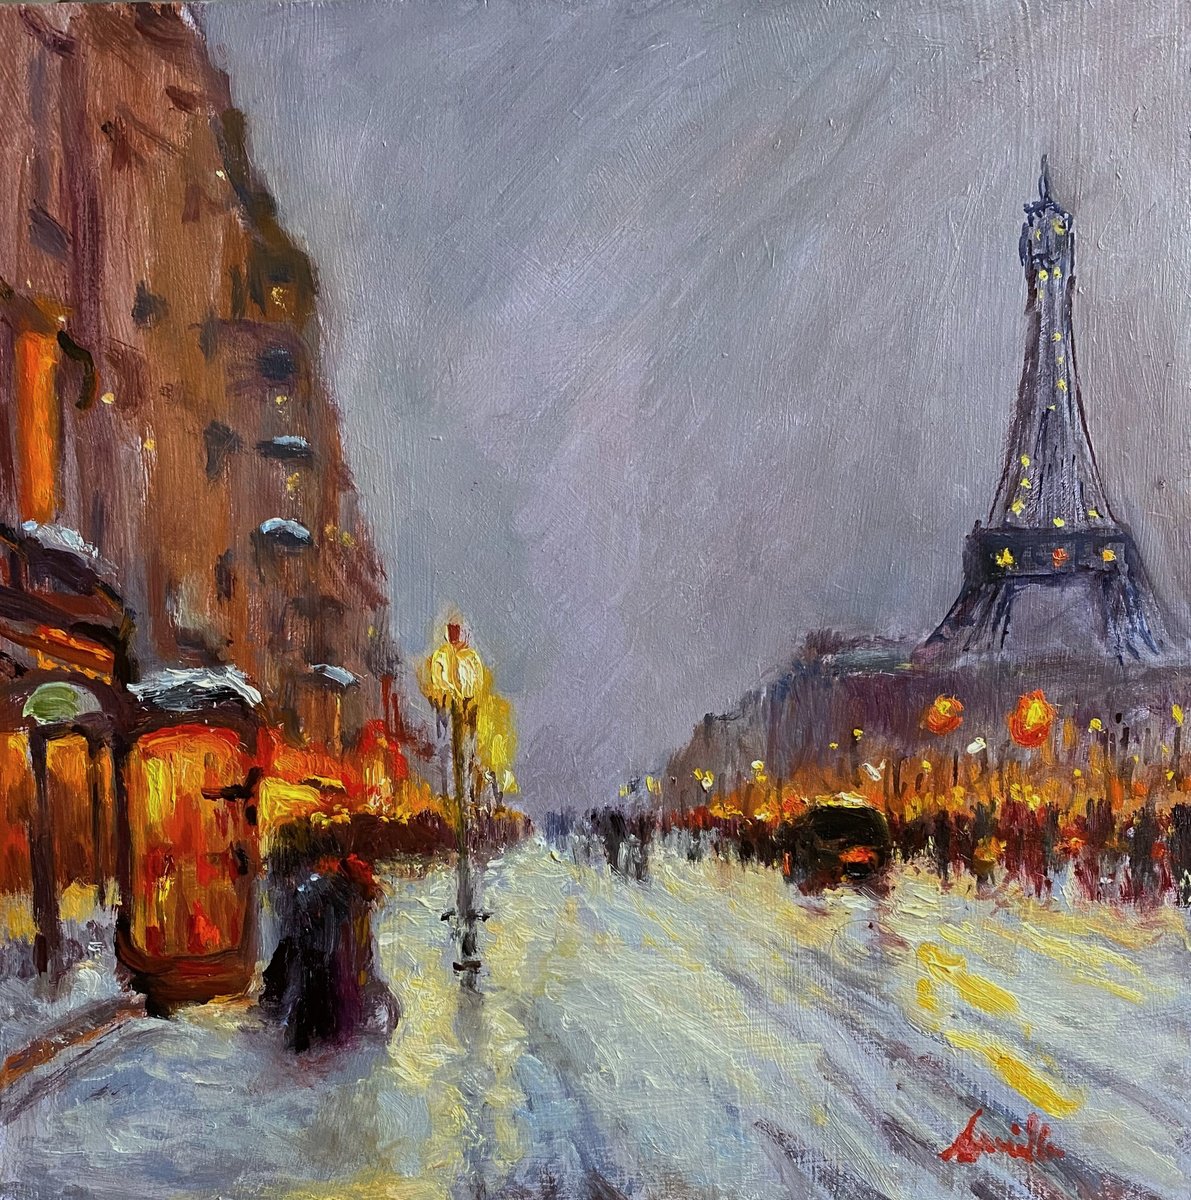 Paris in the snow with the Eiffel Tower. Original Cityscape Oil Painting. by Jackie Smith